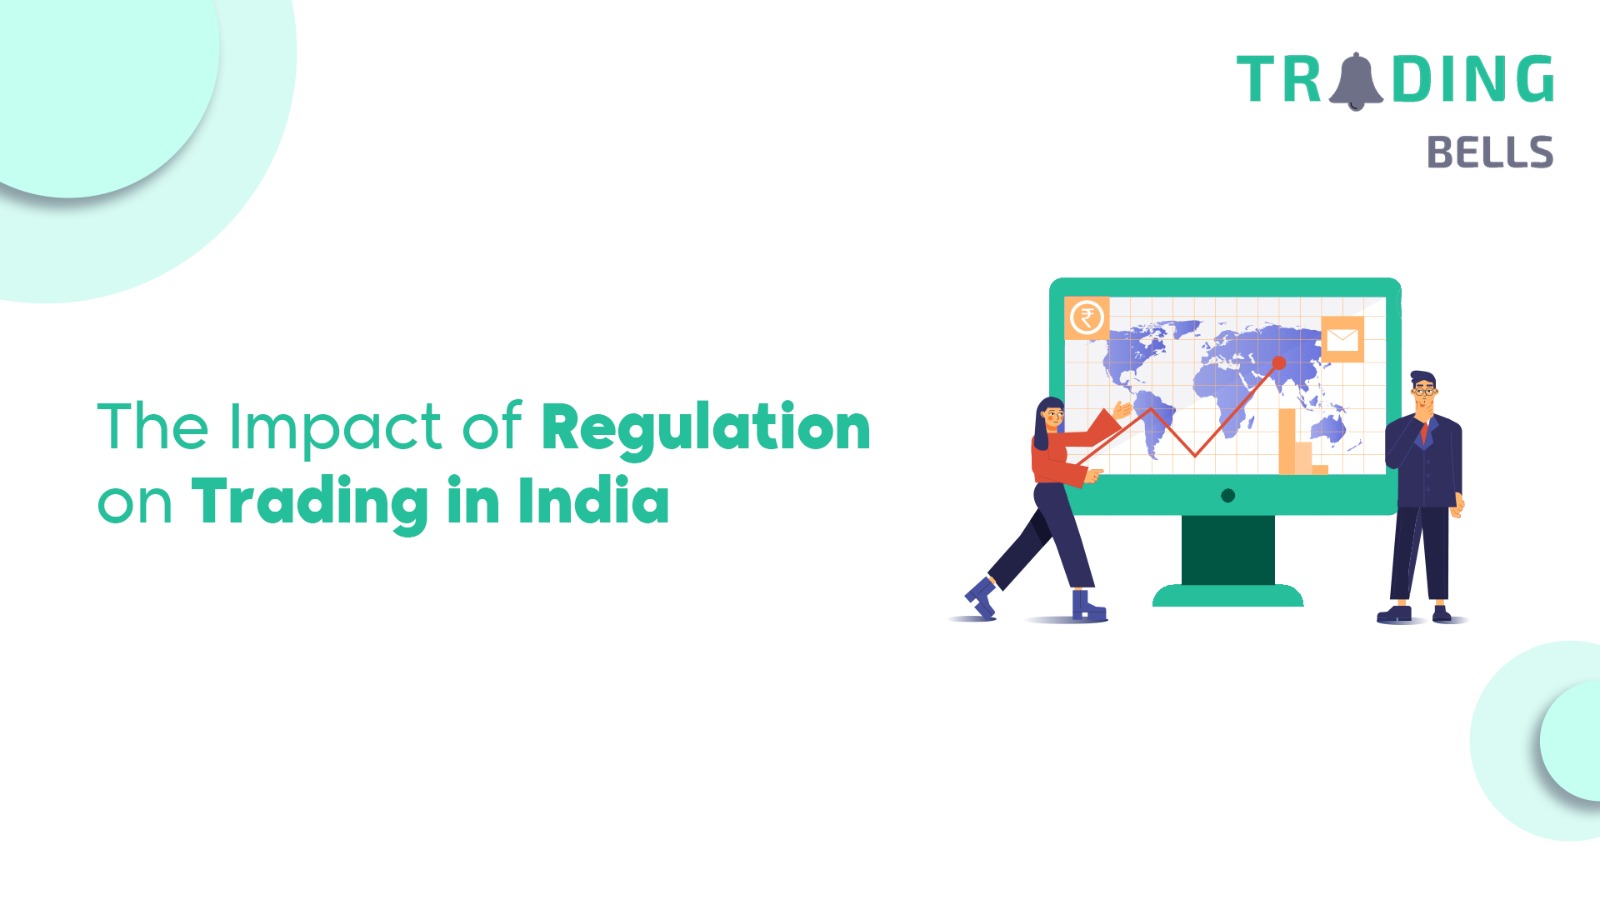 The Impact of Regulation on Trading in India